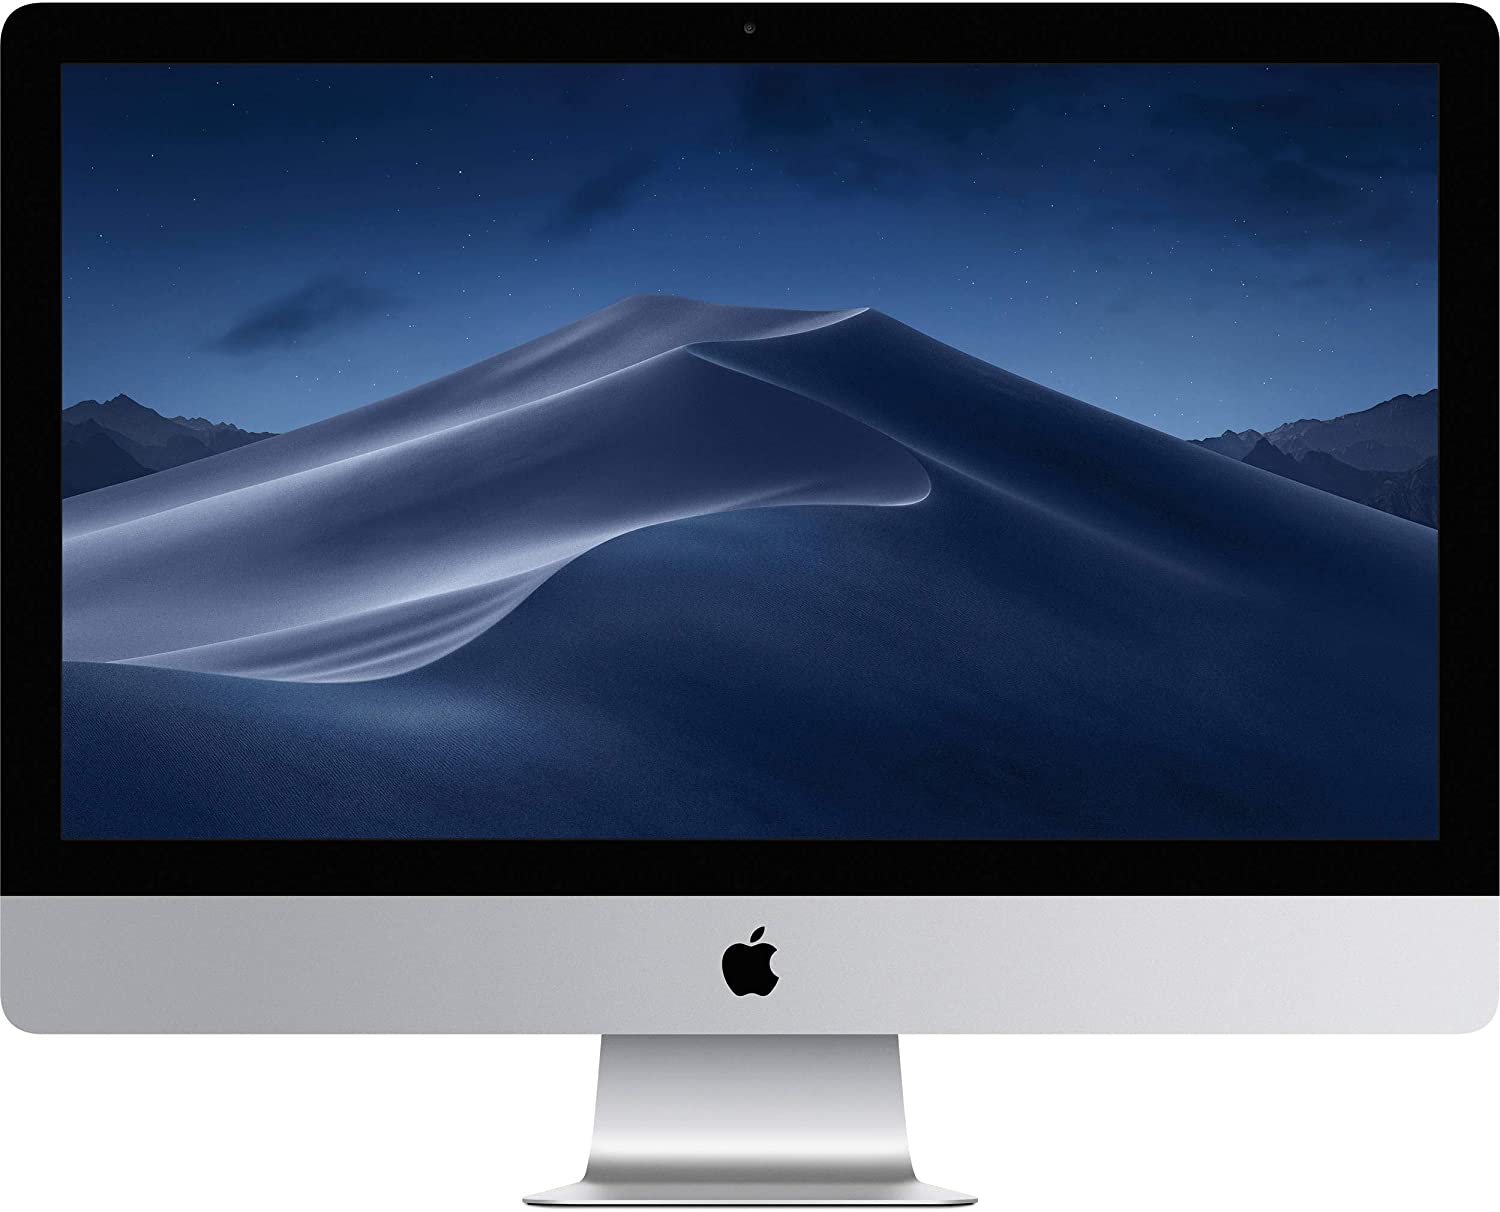 Apple iMac 27" All-In-One Computer, Intel Core i5, 8GB RAM, 1TB HD, Mac OS, Silver, ME088LL/A (Used) - image 1 of 3